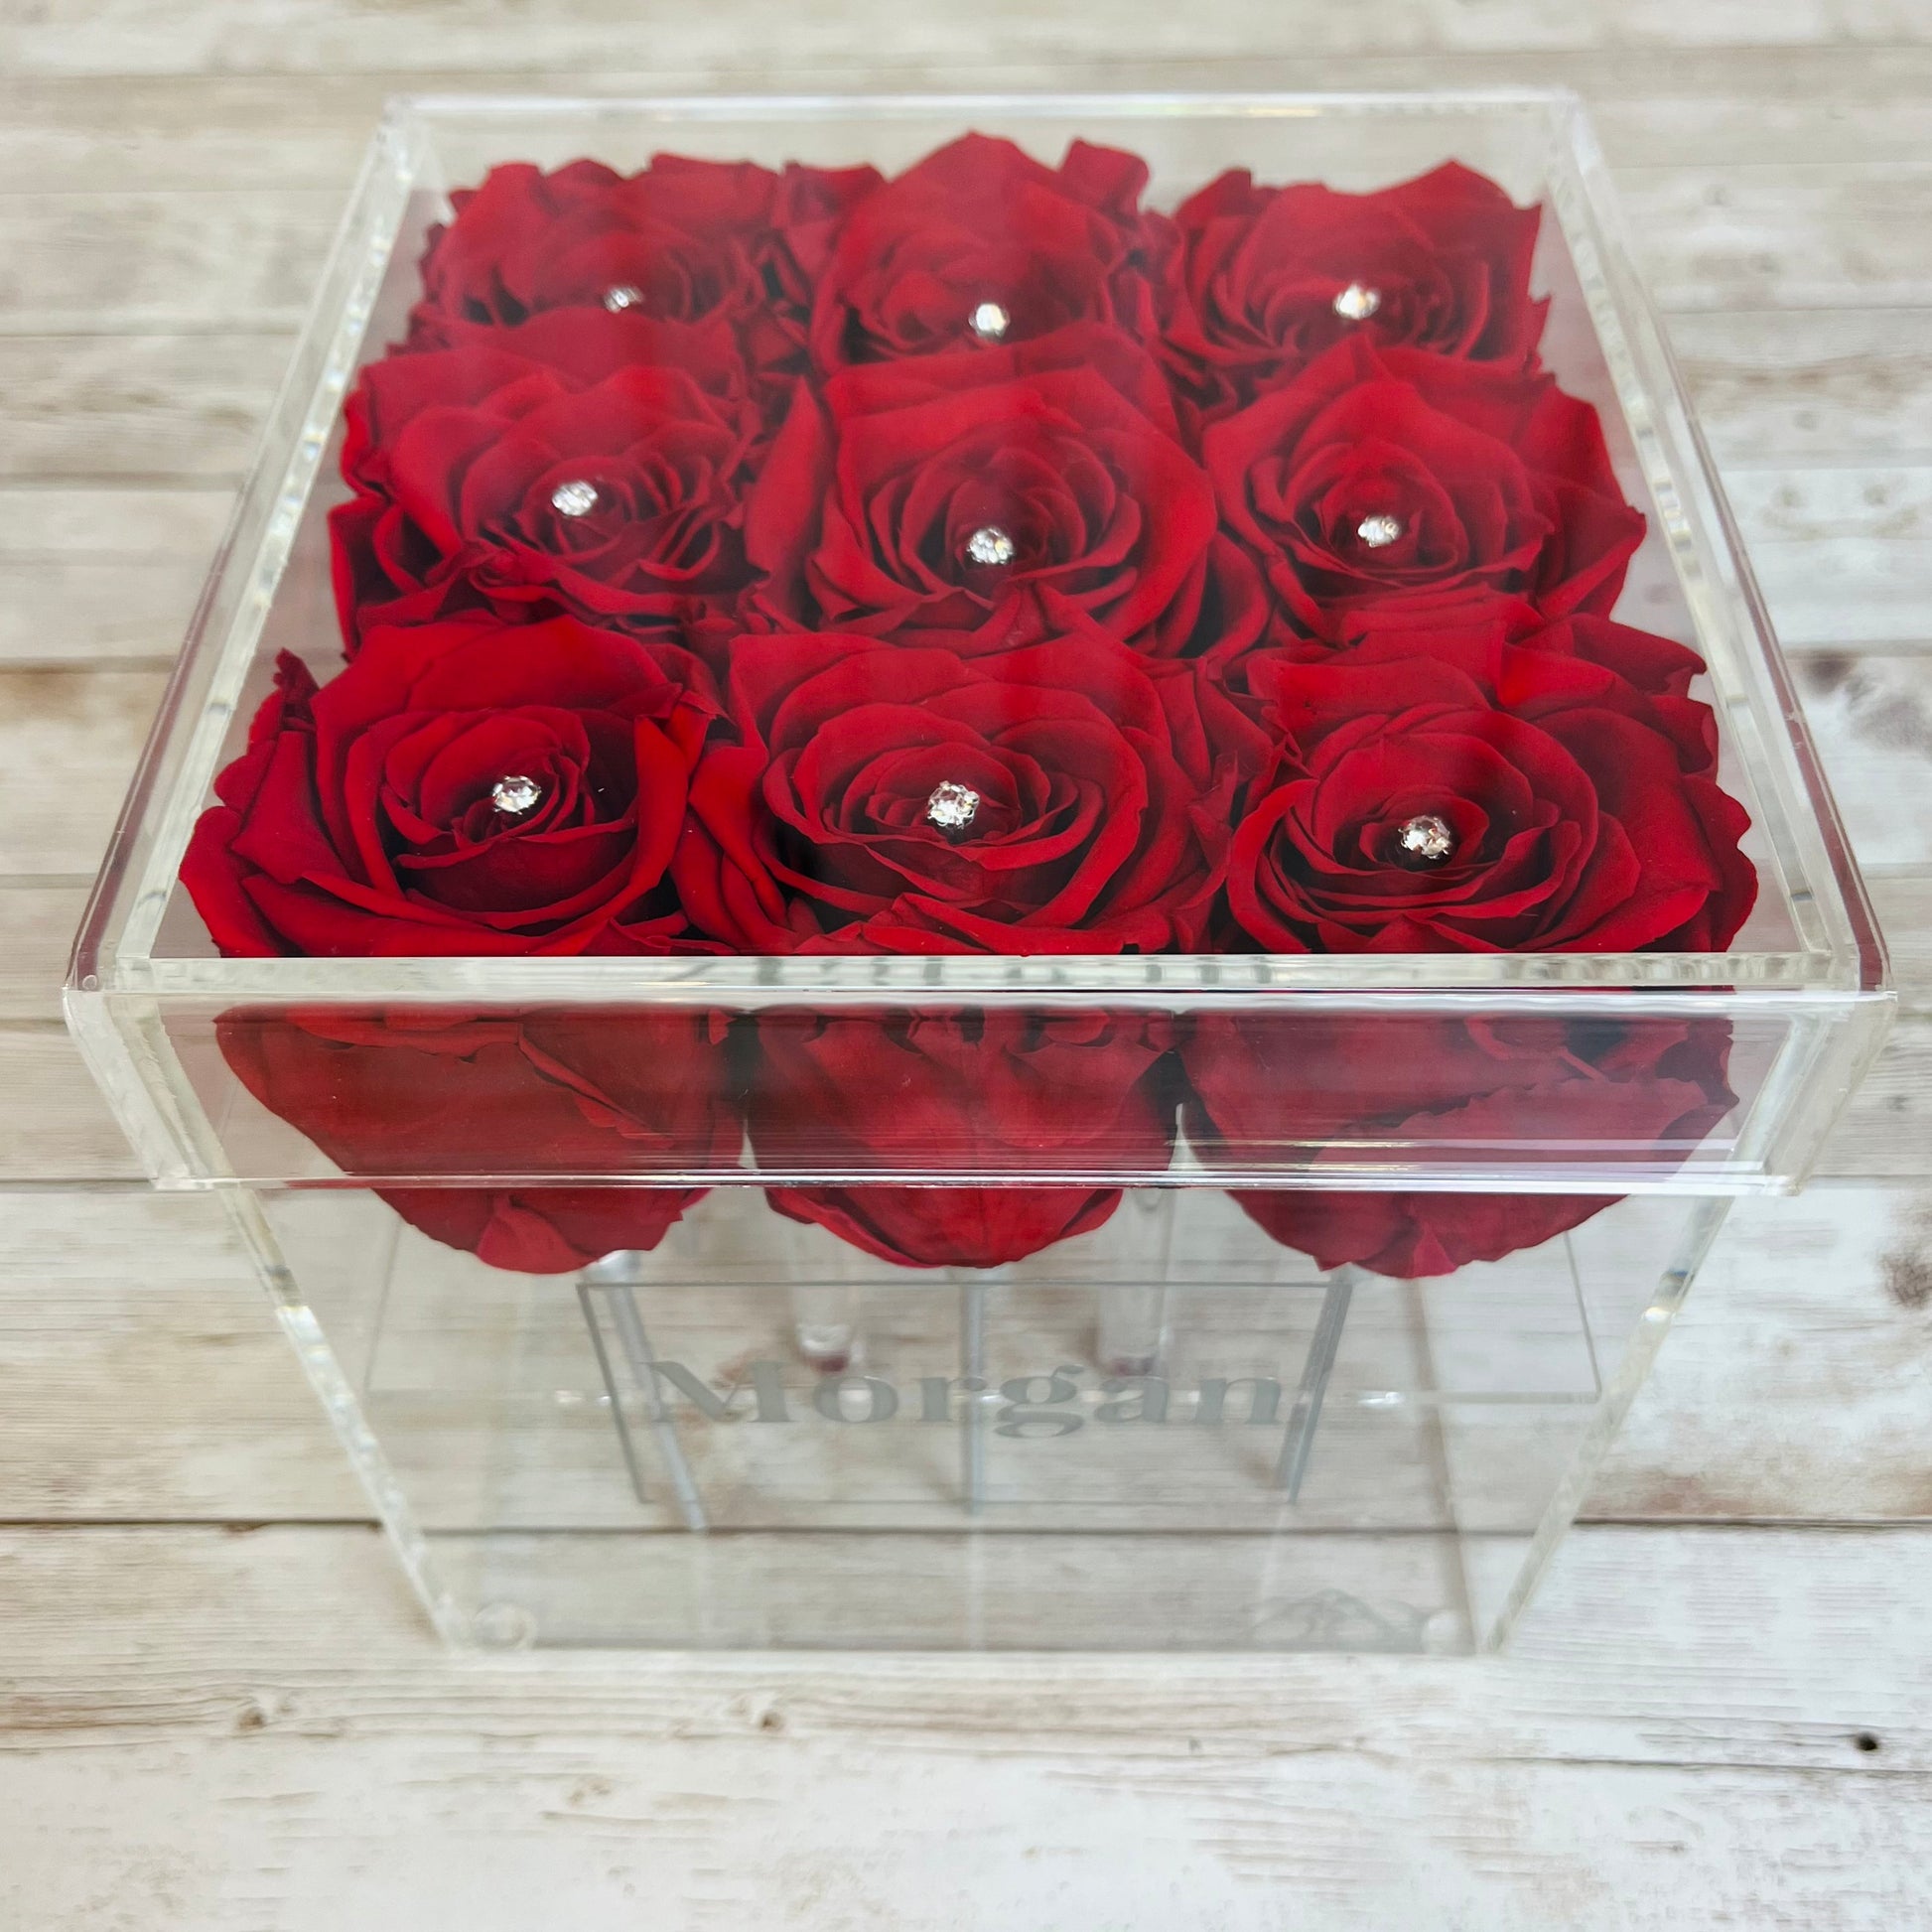 Infinity Roses - Red One Year Roses - Personalised Acrylic Box - Roses with gold stems